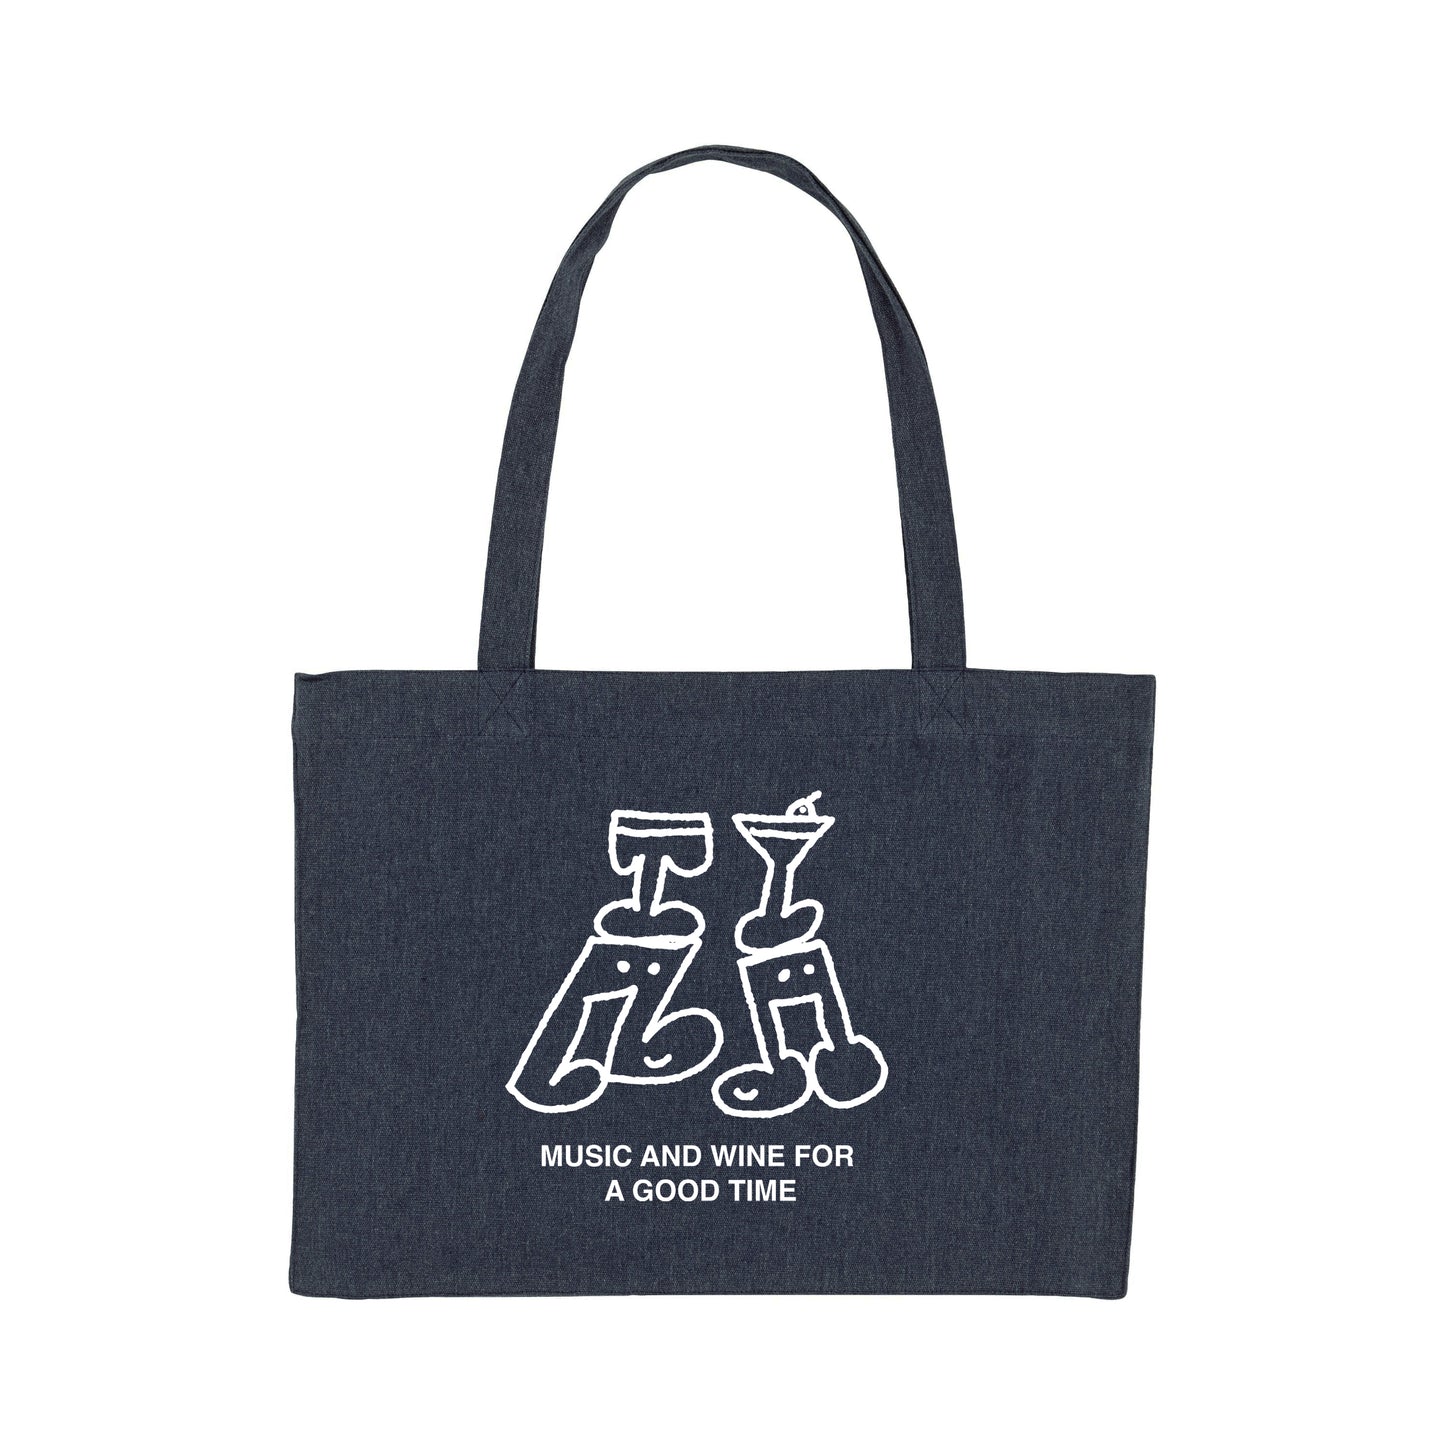 Other Side Store 'Music & Wine' Organic Tote - Navy Denim